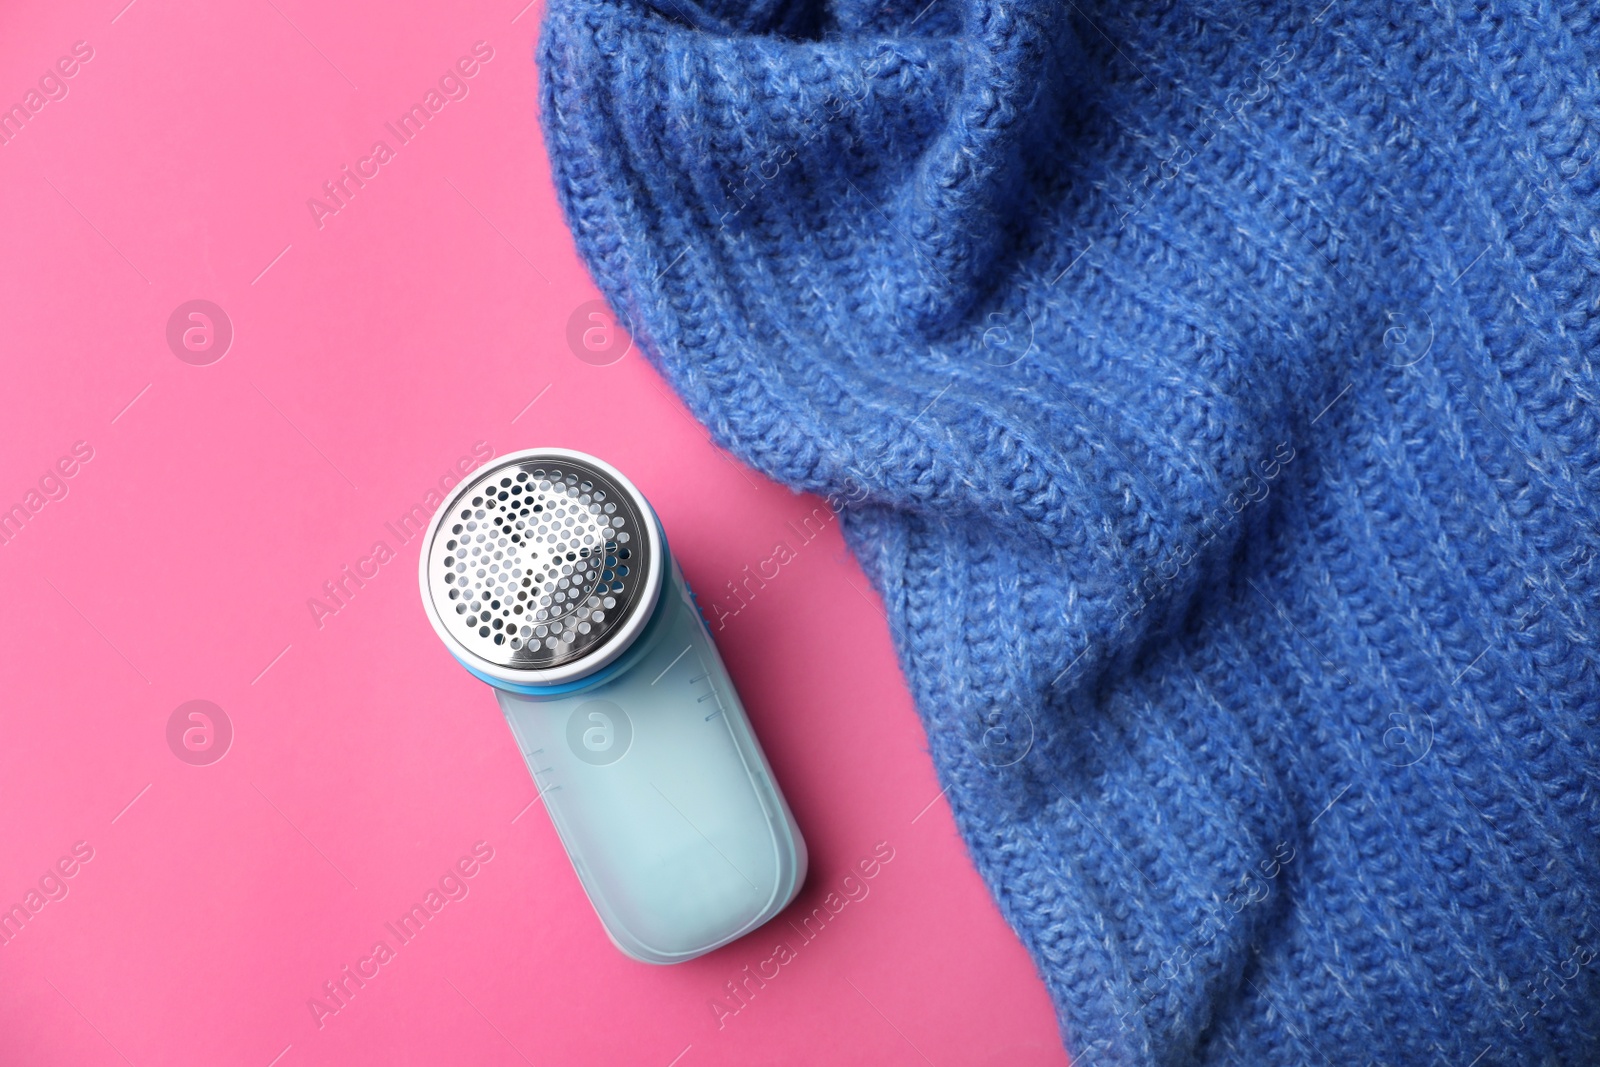 Photo of Modern fabric shaver and woolen sweater on pink background, flat lay